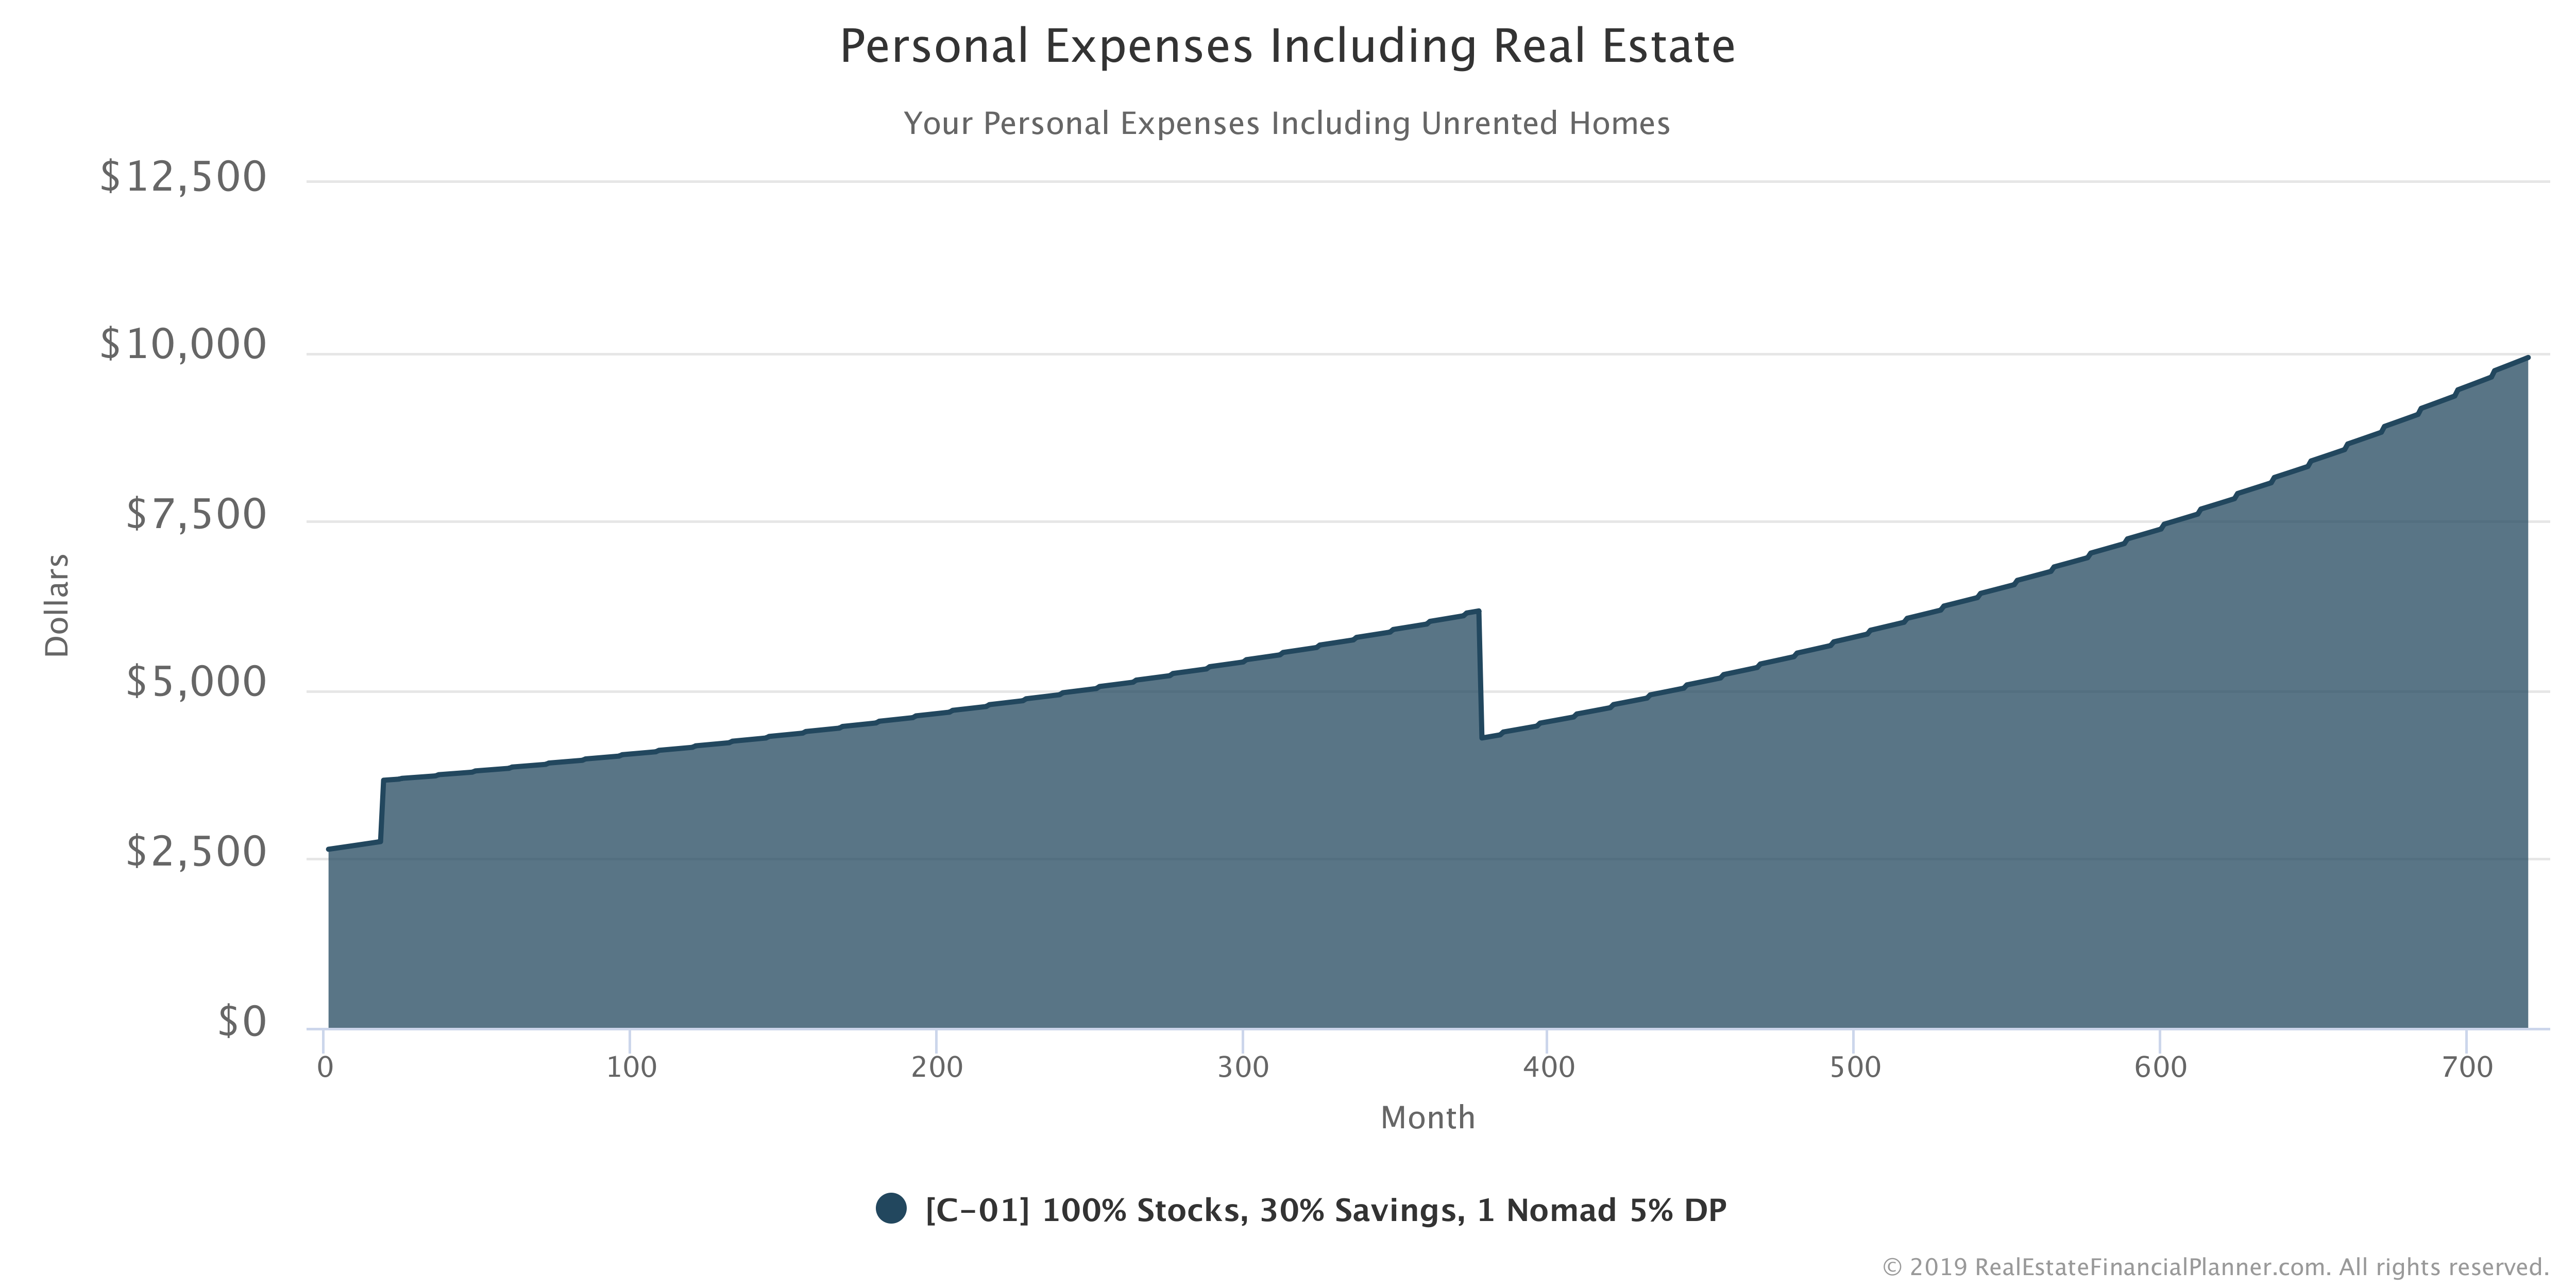 Personal Expenses Including Real Estate - 1 Nomad